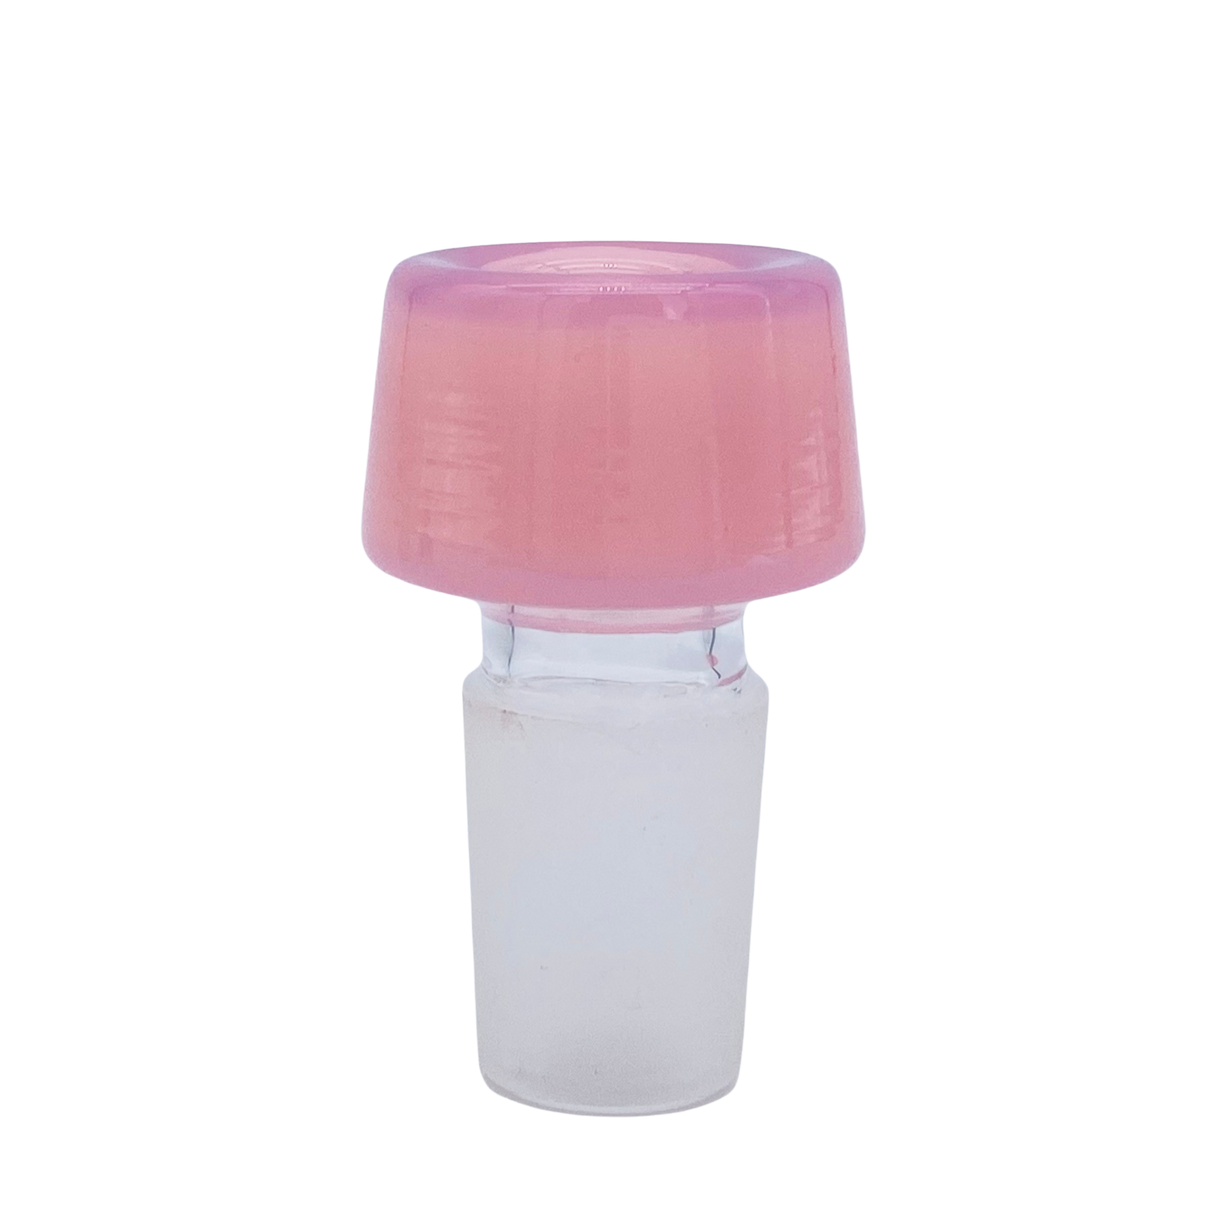 MAV Glass 7 Hole Pro Bowl in 19mm size, pink variant, front view on a seamless white background